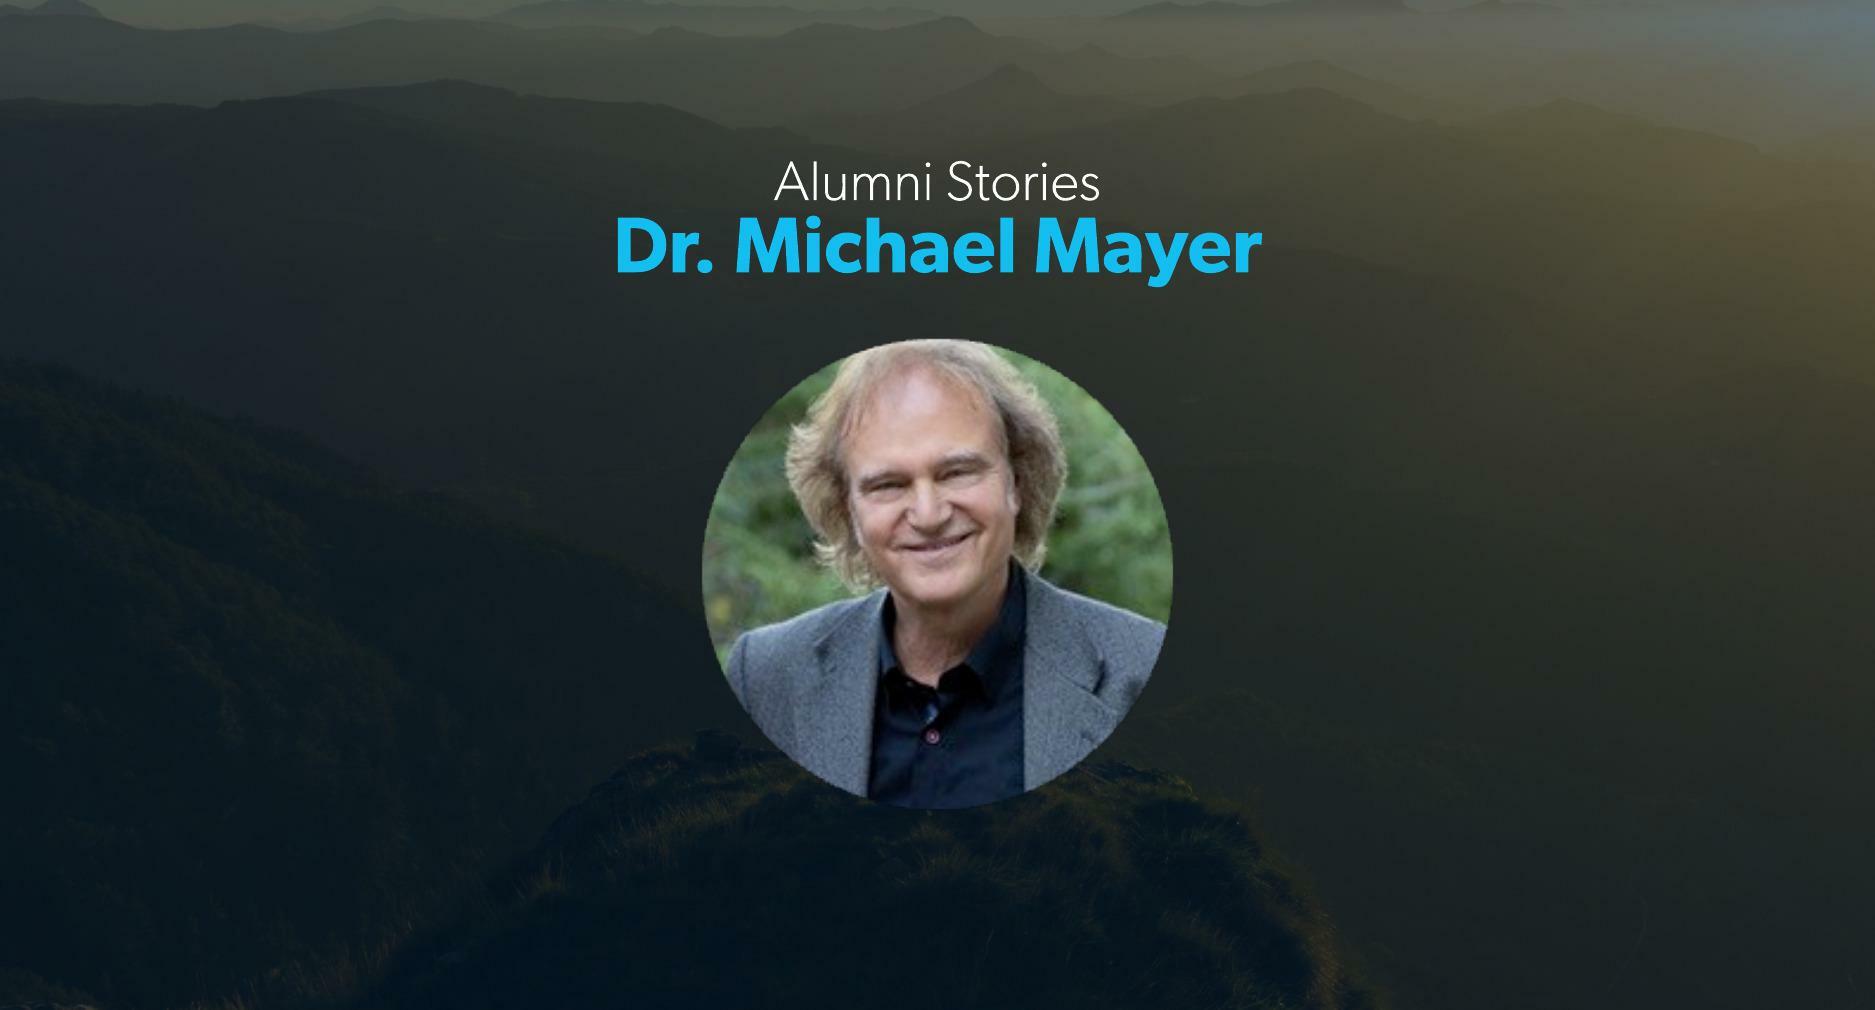 Dr. Michael Mayer smiles in a profile photo inset on a banner image under text displaying hisname.